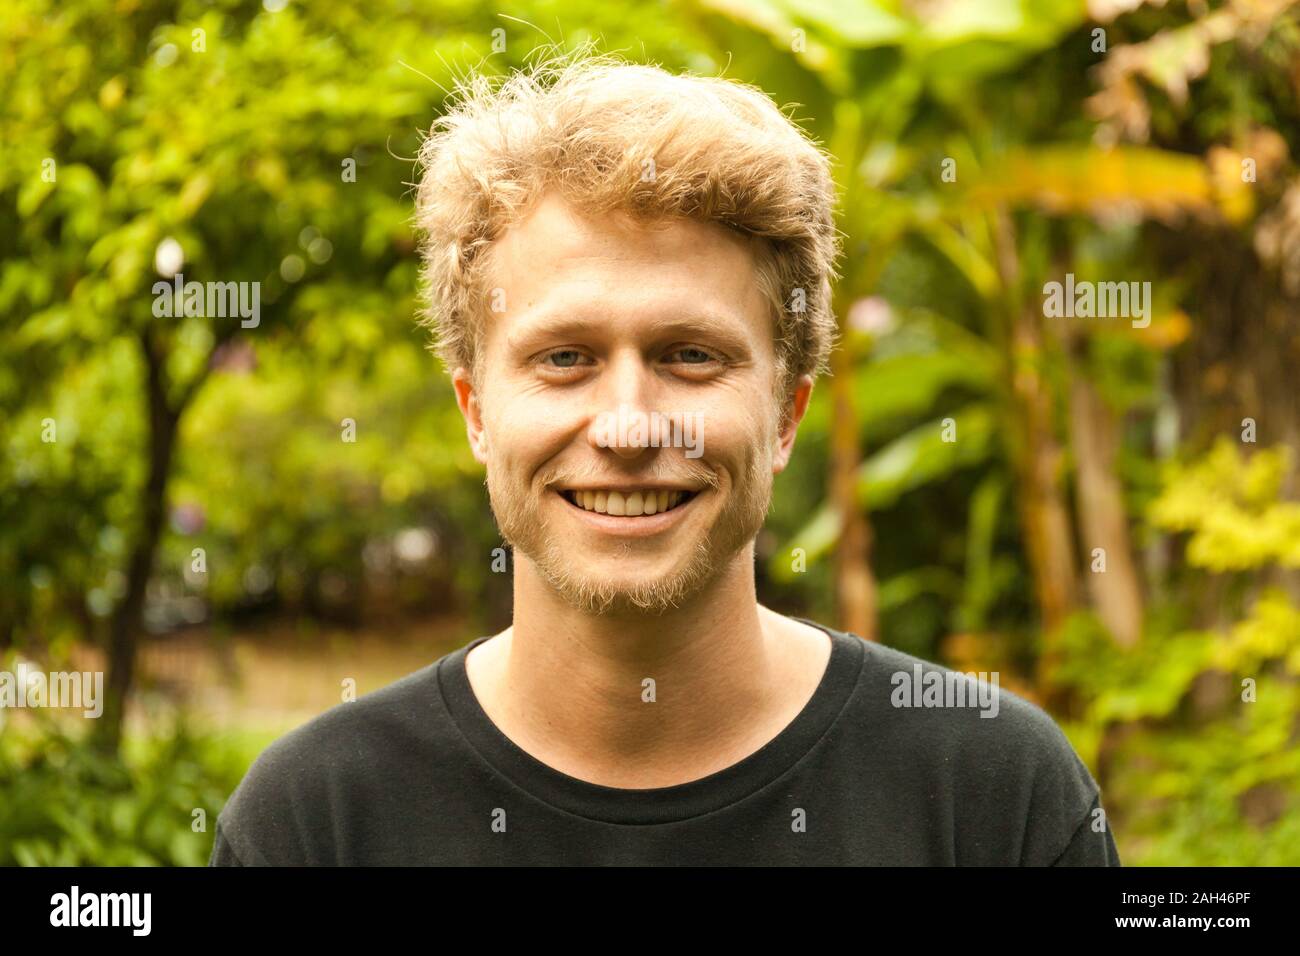 Portrait of smiling young strawberry blonde man Stock Photo